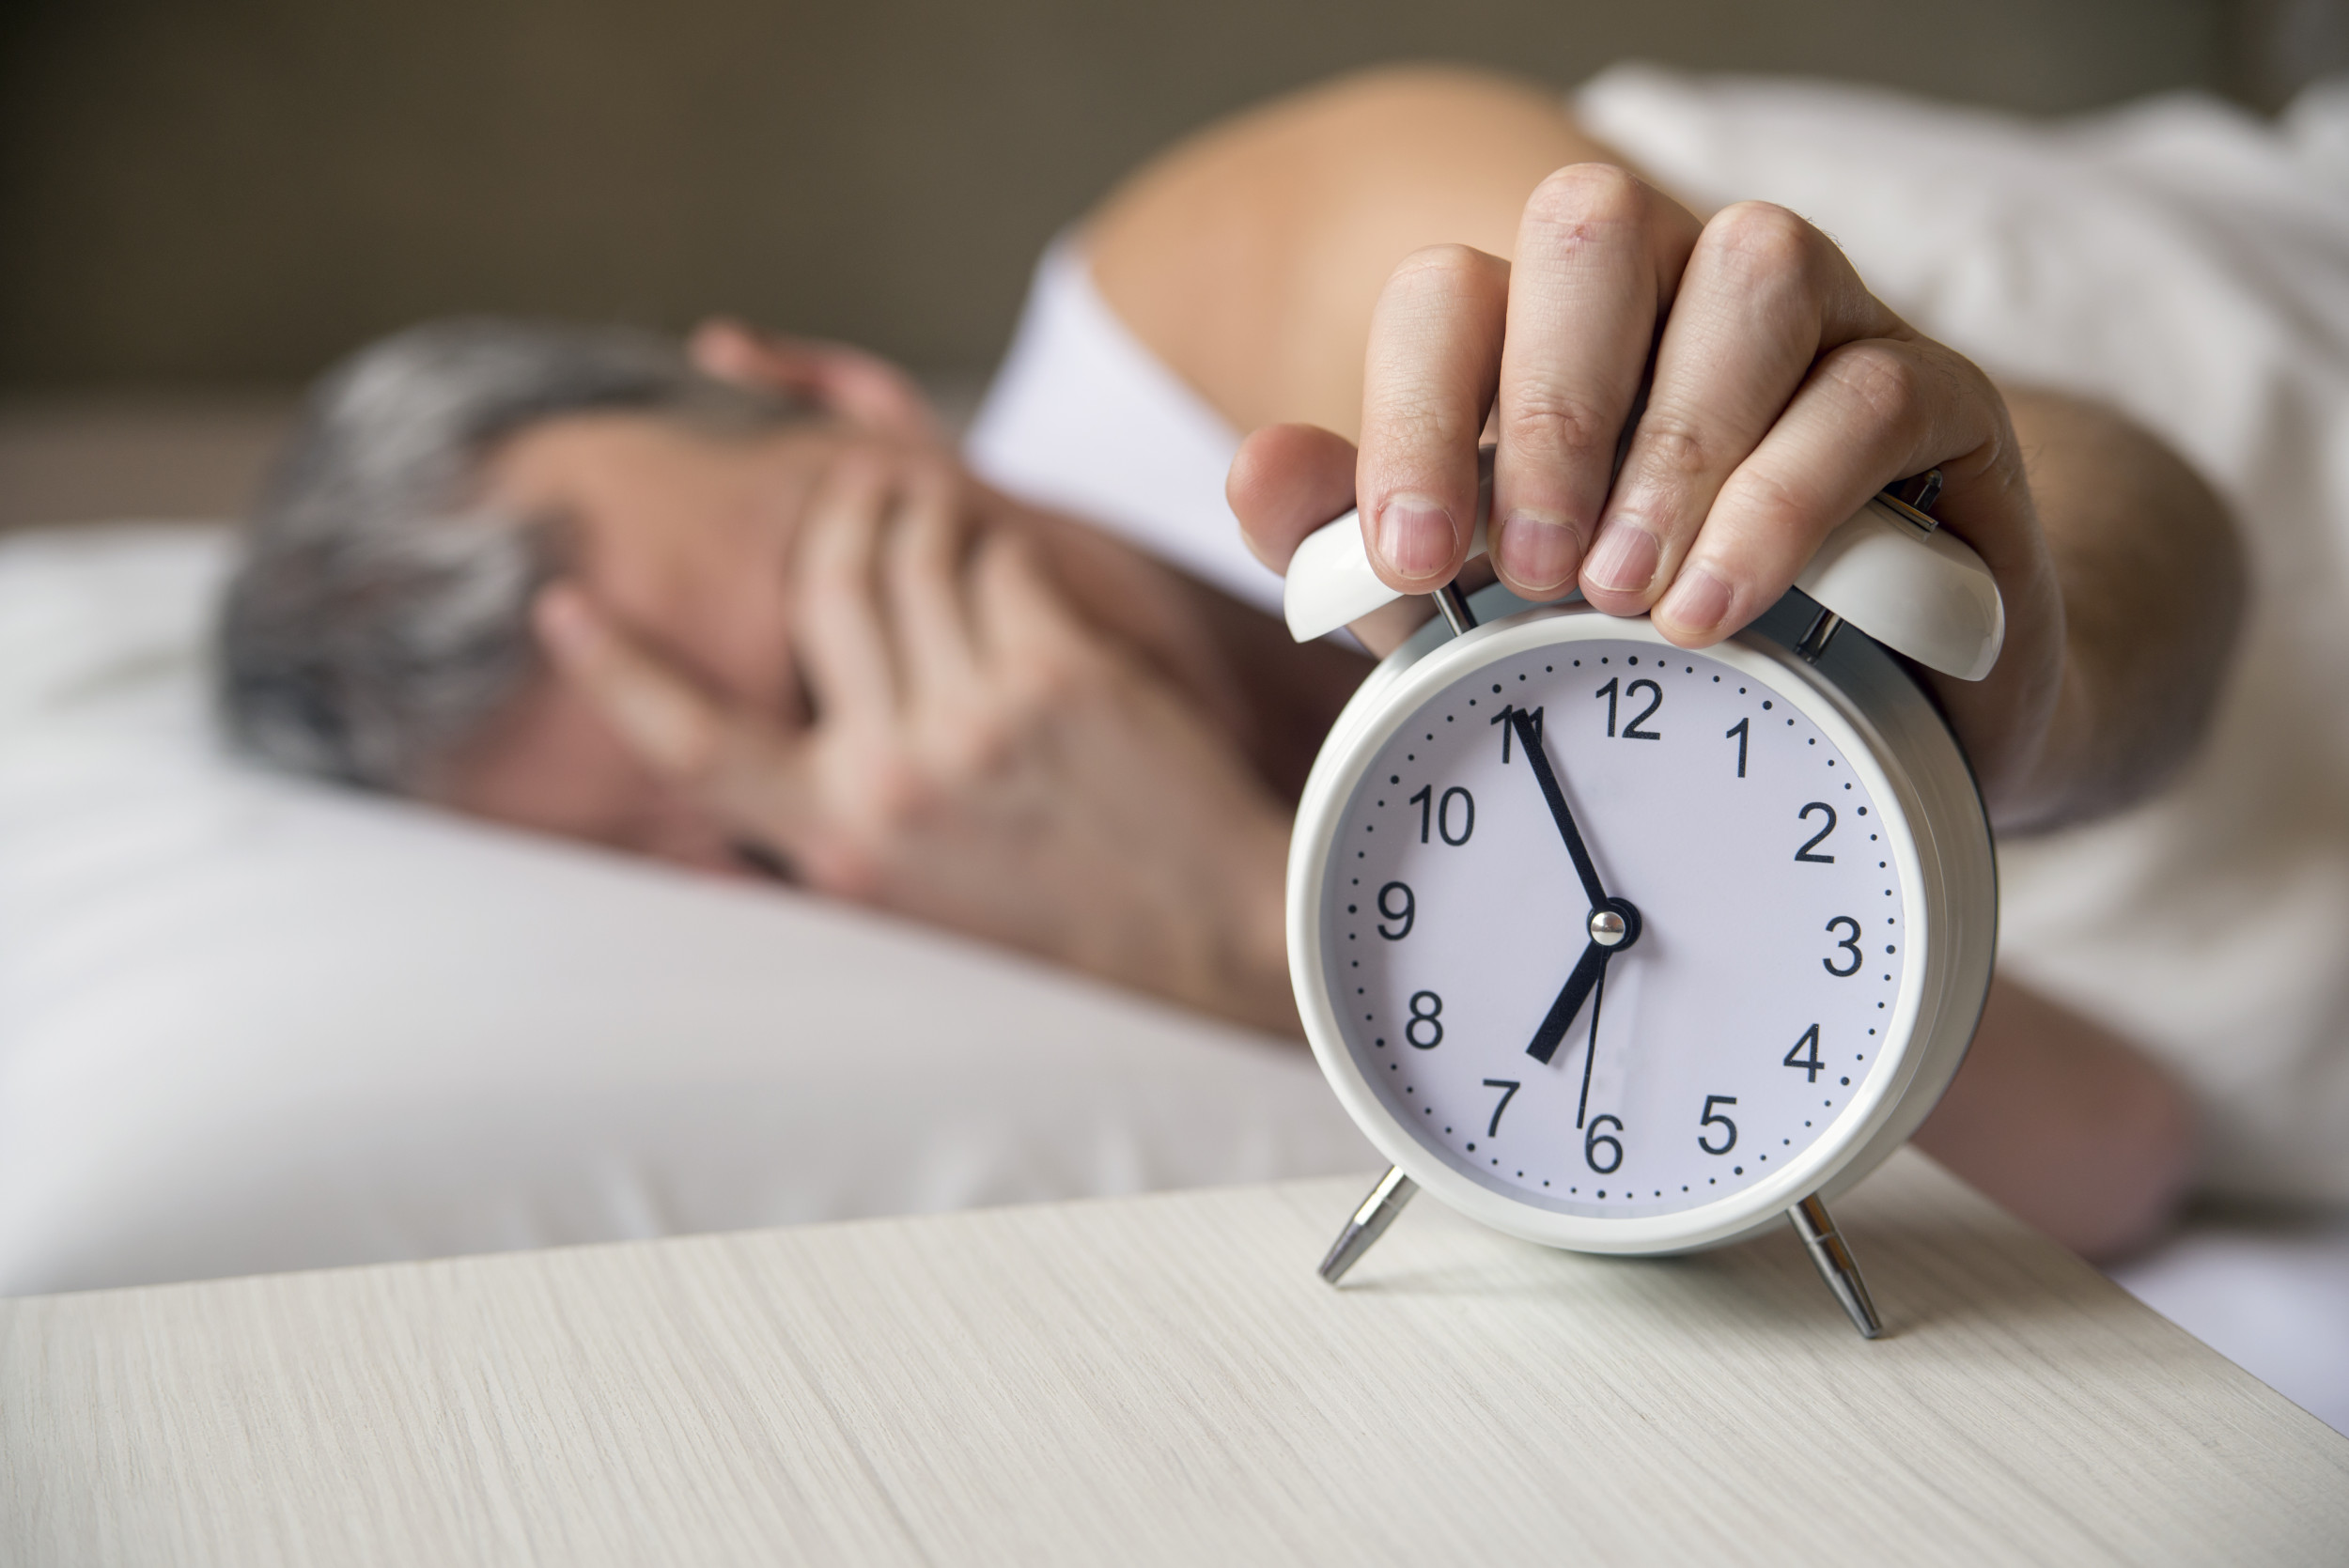 Health Issues Intensified by Lack of Sleep